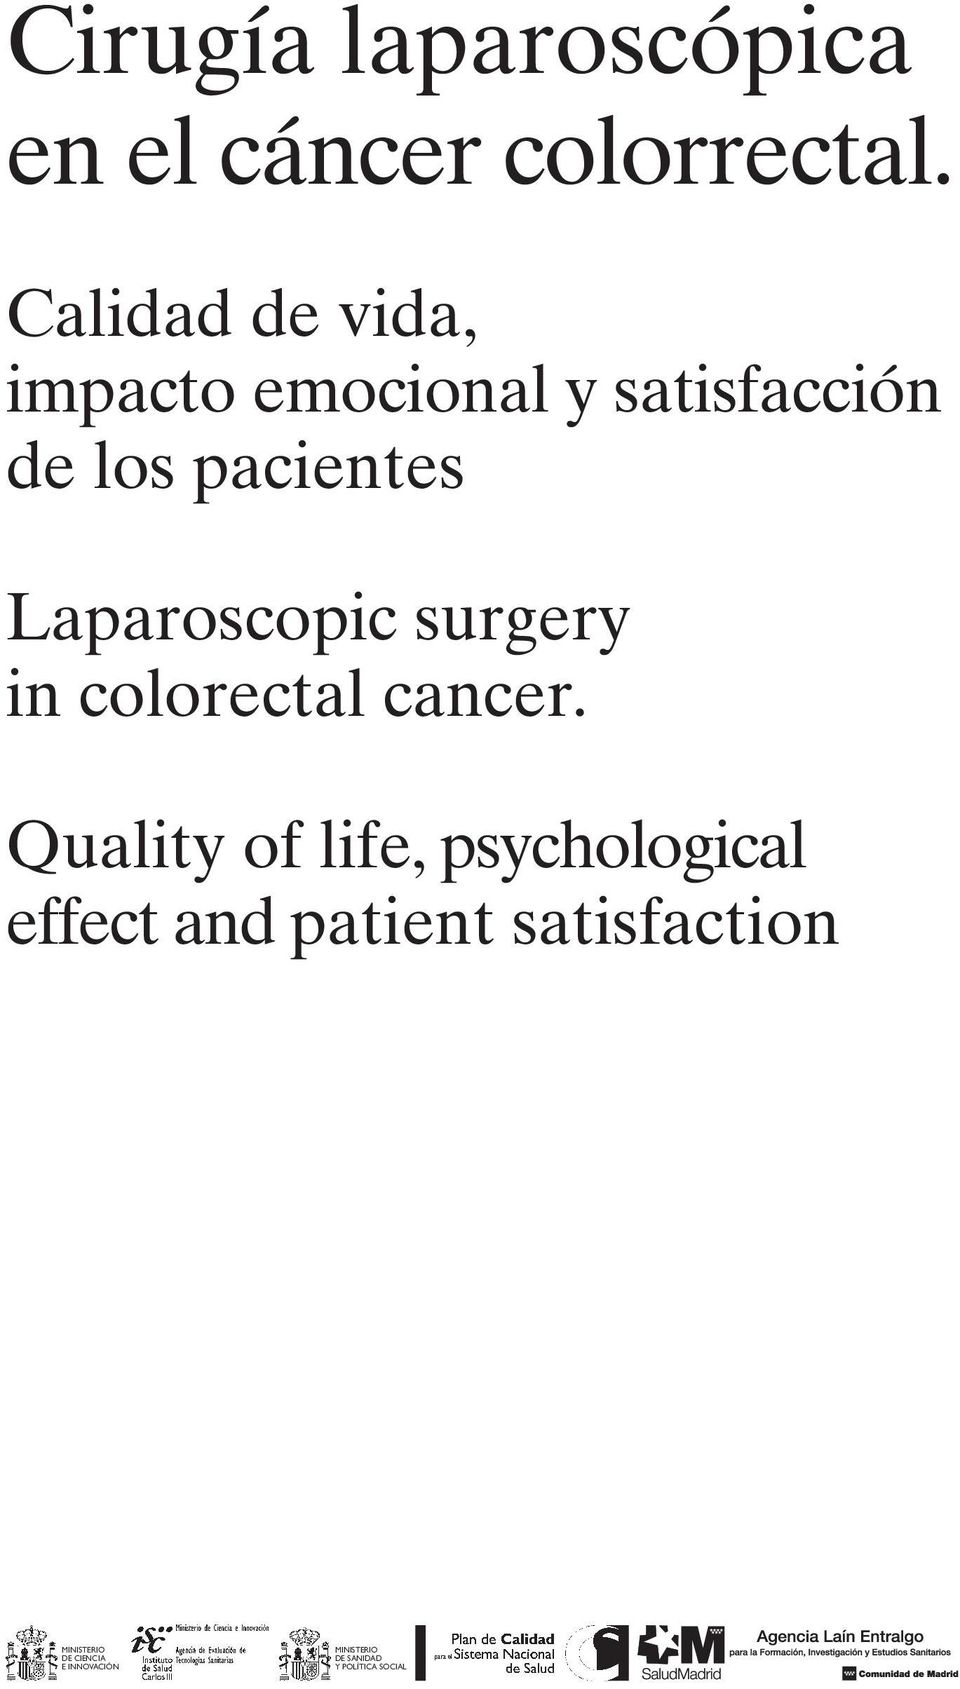 Laparoscopic surgery in colorectal cancer.